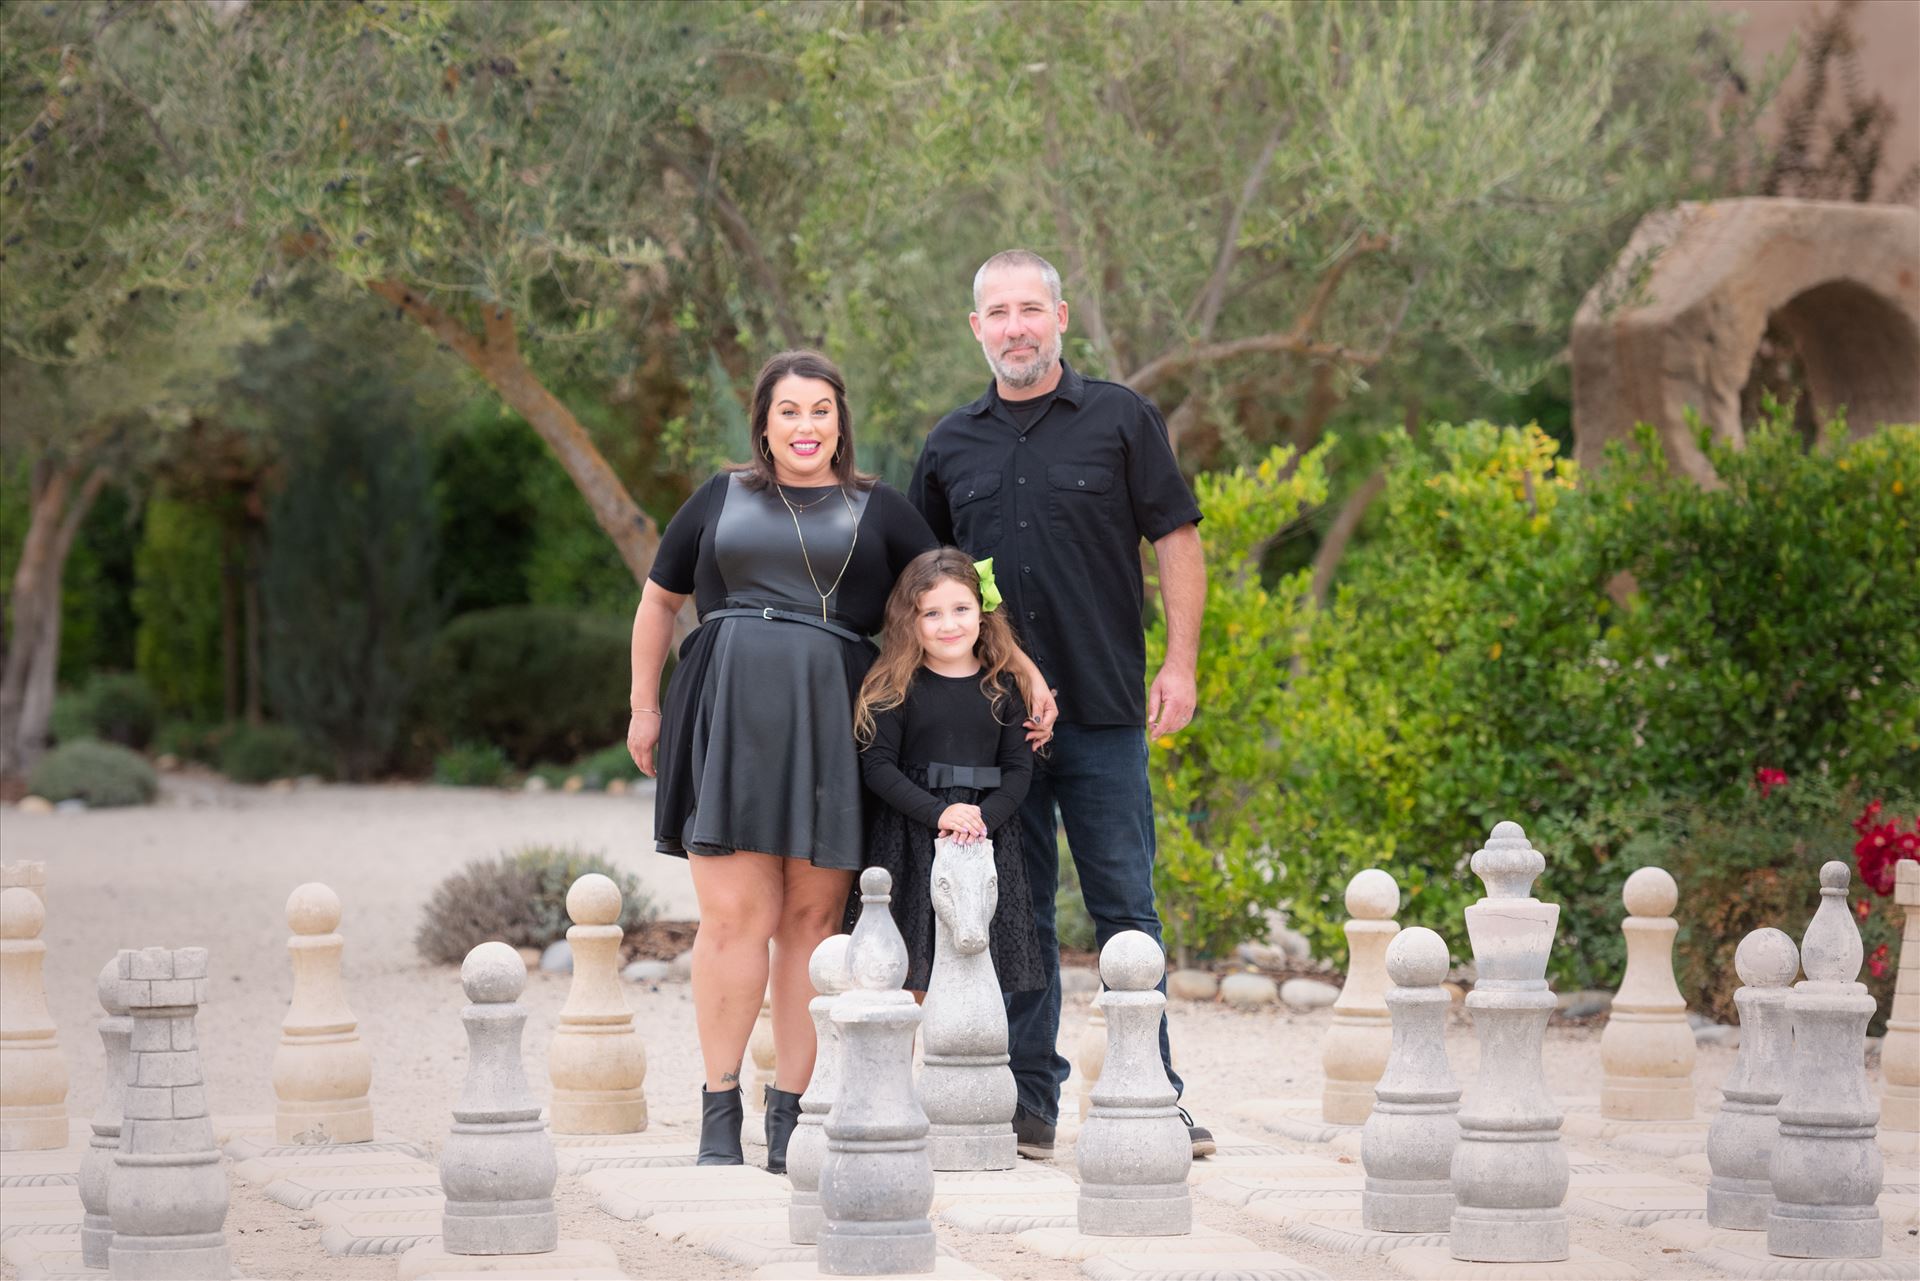 Final-8089.JPG - Sarah Williams of Mirror's Edge Photography, a San Luis Obispo Wedding, Engagement and Portrait Photographer, captures the Foster Family Fall Session at the gorgeous Allegretto Resort and Vineyards in Paso Robles, California. Chess Board Family Photograph by Sarah Williams